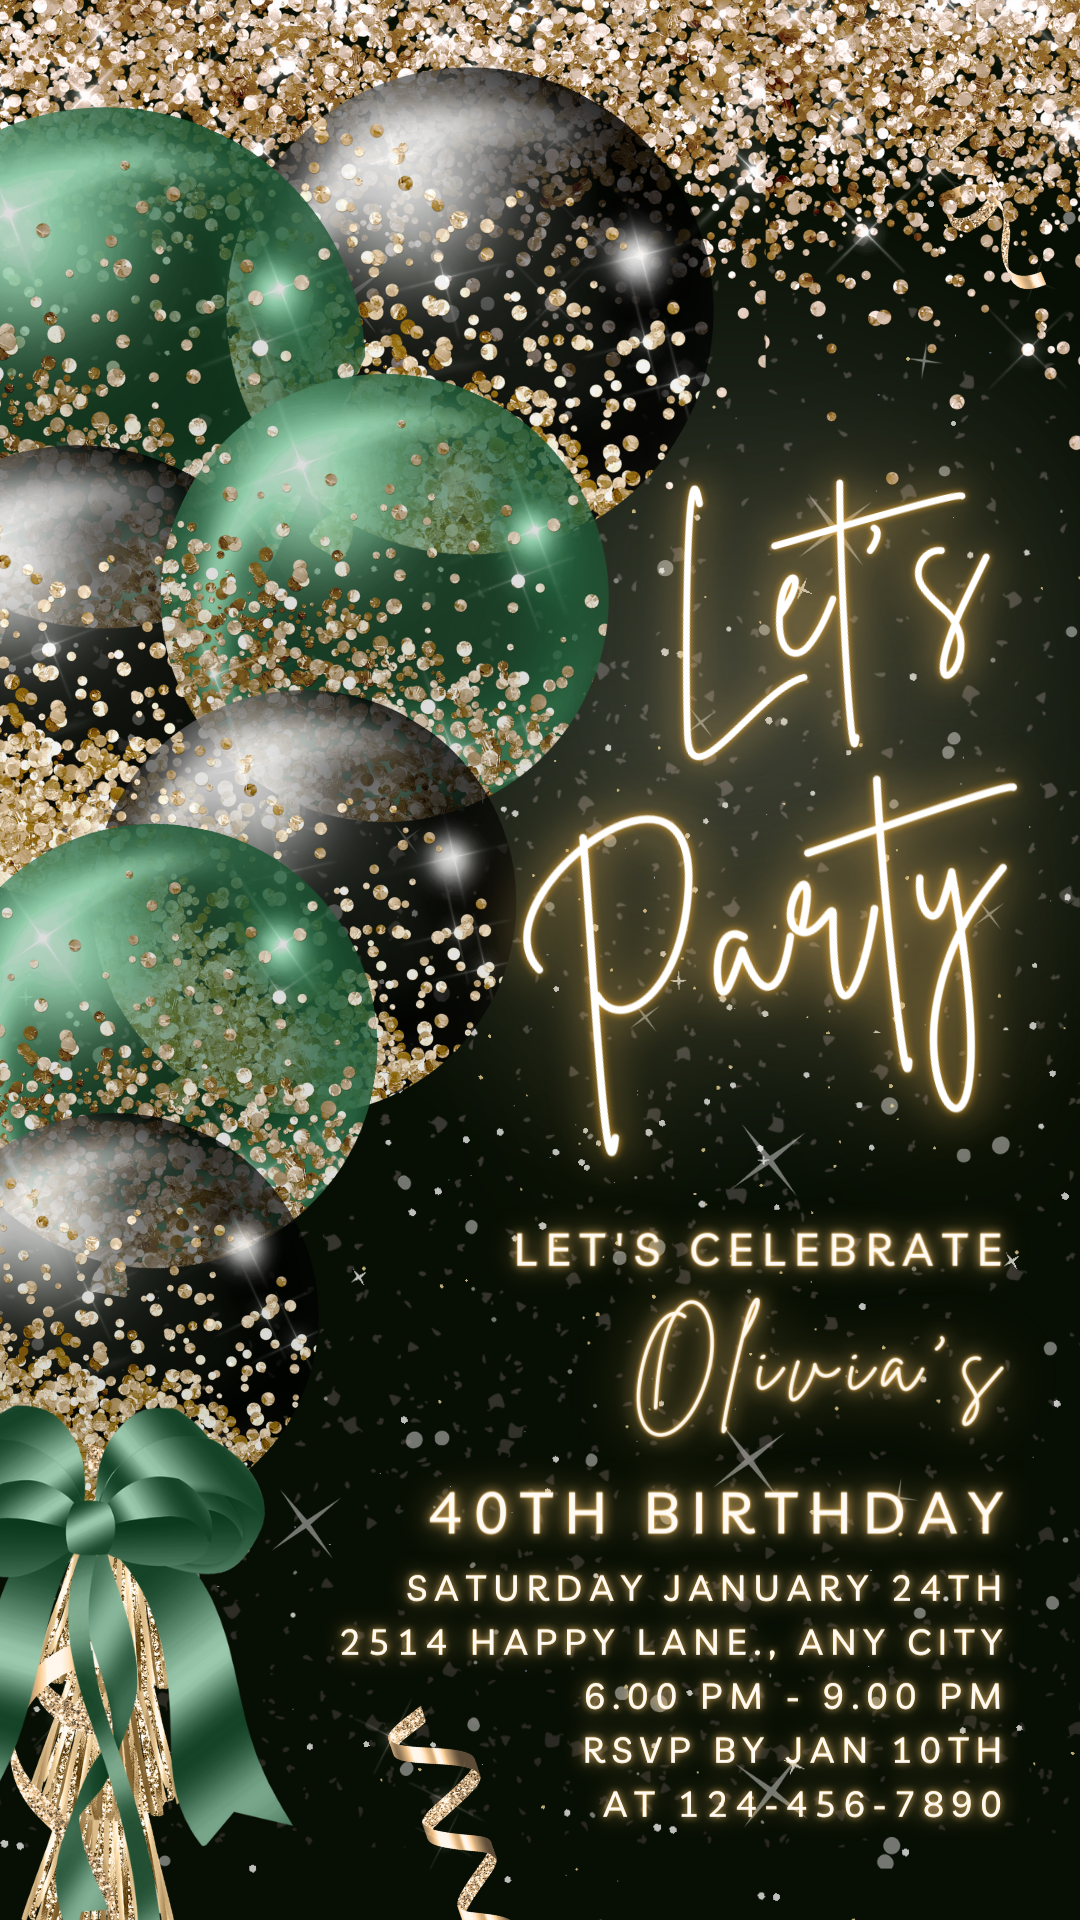 Animated Let's Party invitation, Emerald & Black Dance Night Invite for any Event Celebration, Editable Video Birthday Template